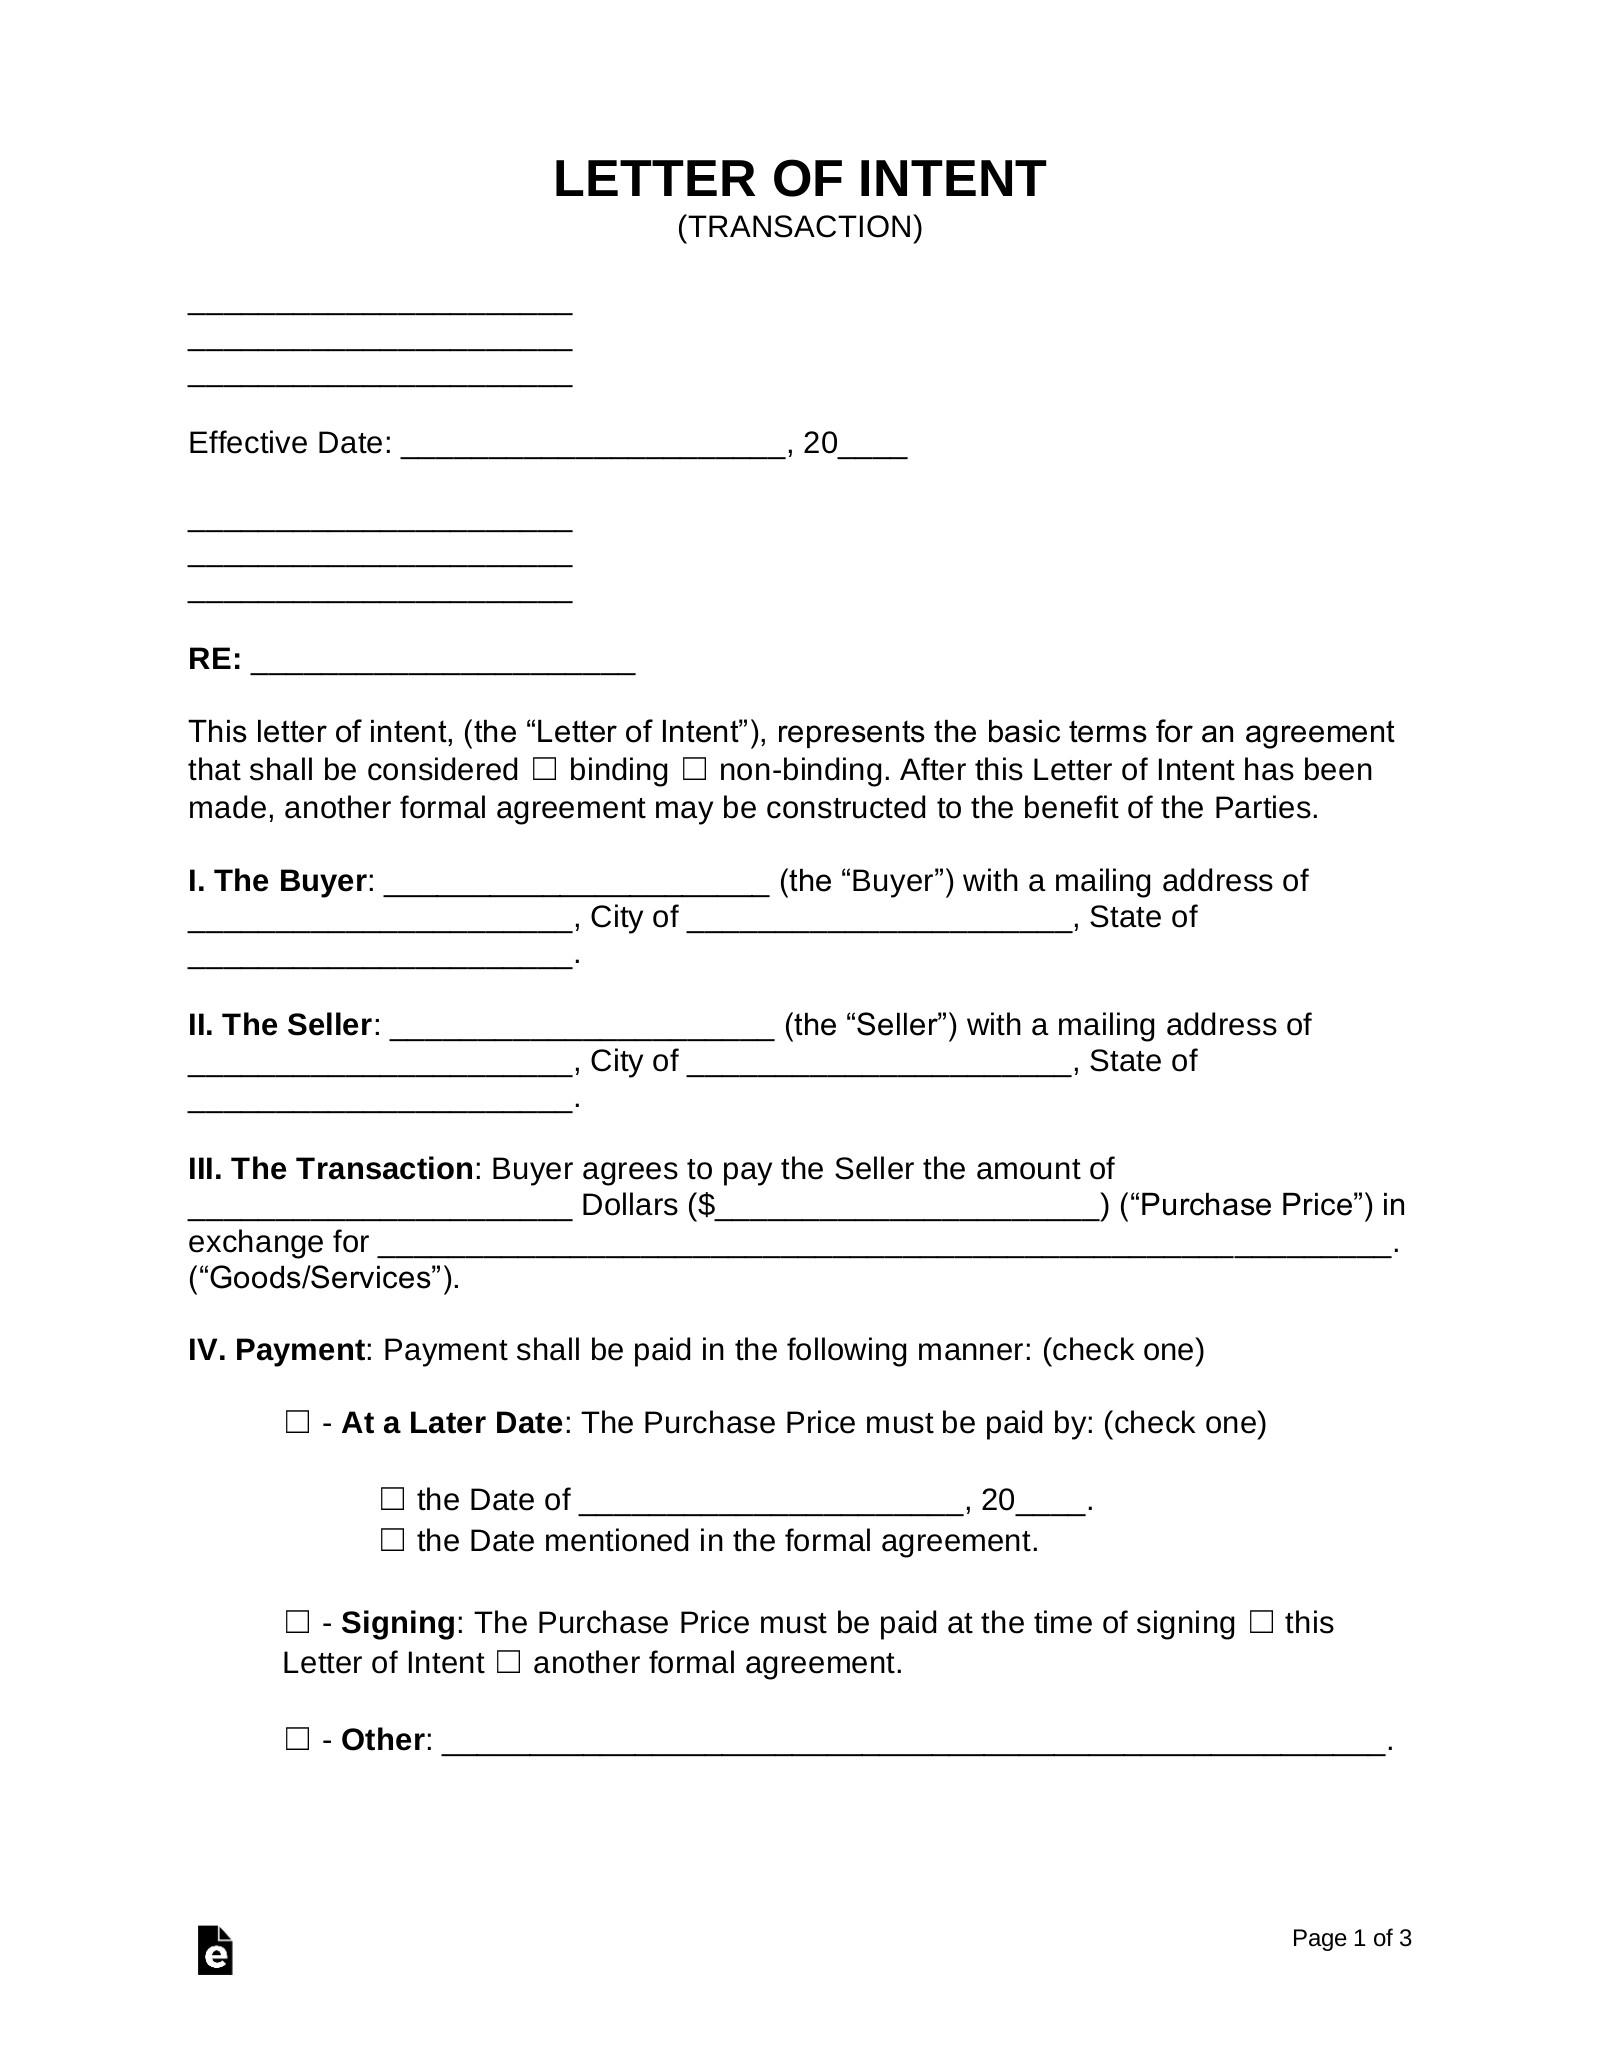 Letters Of Intent Template Sample Letter Intent Template for Your Needs